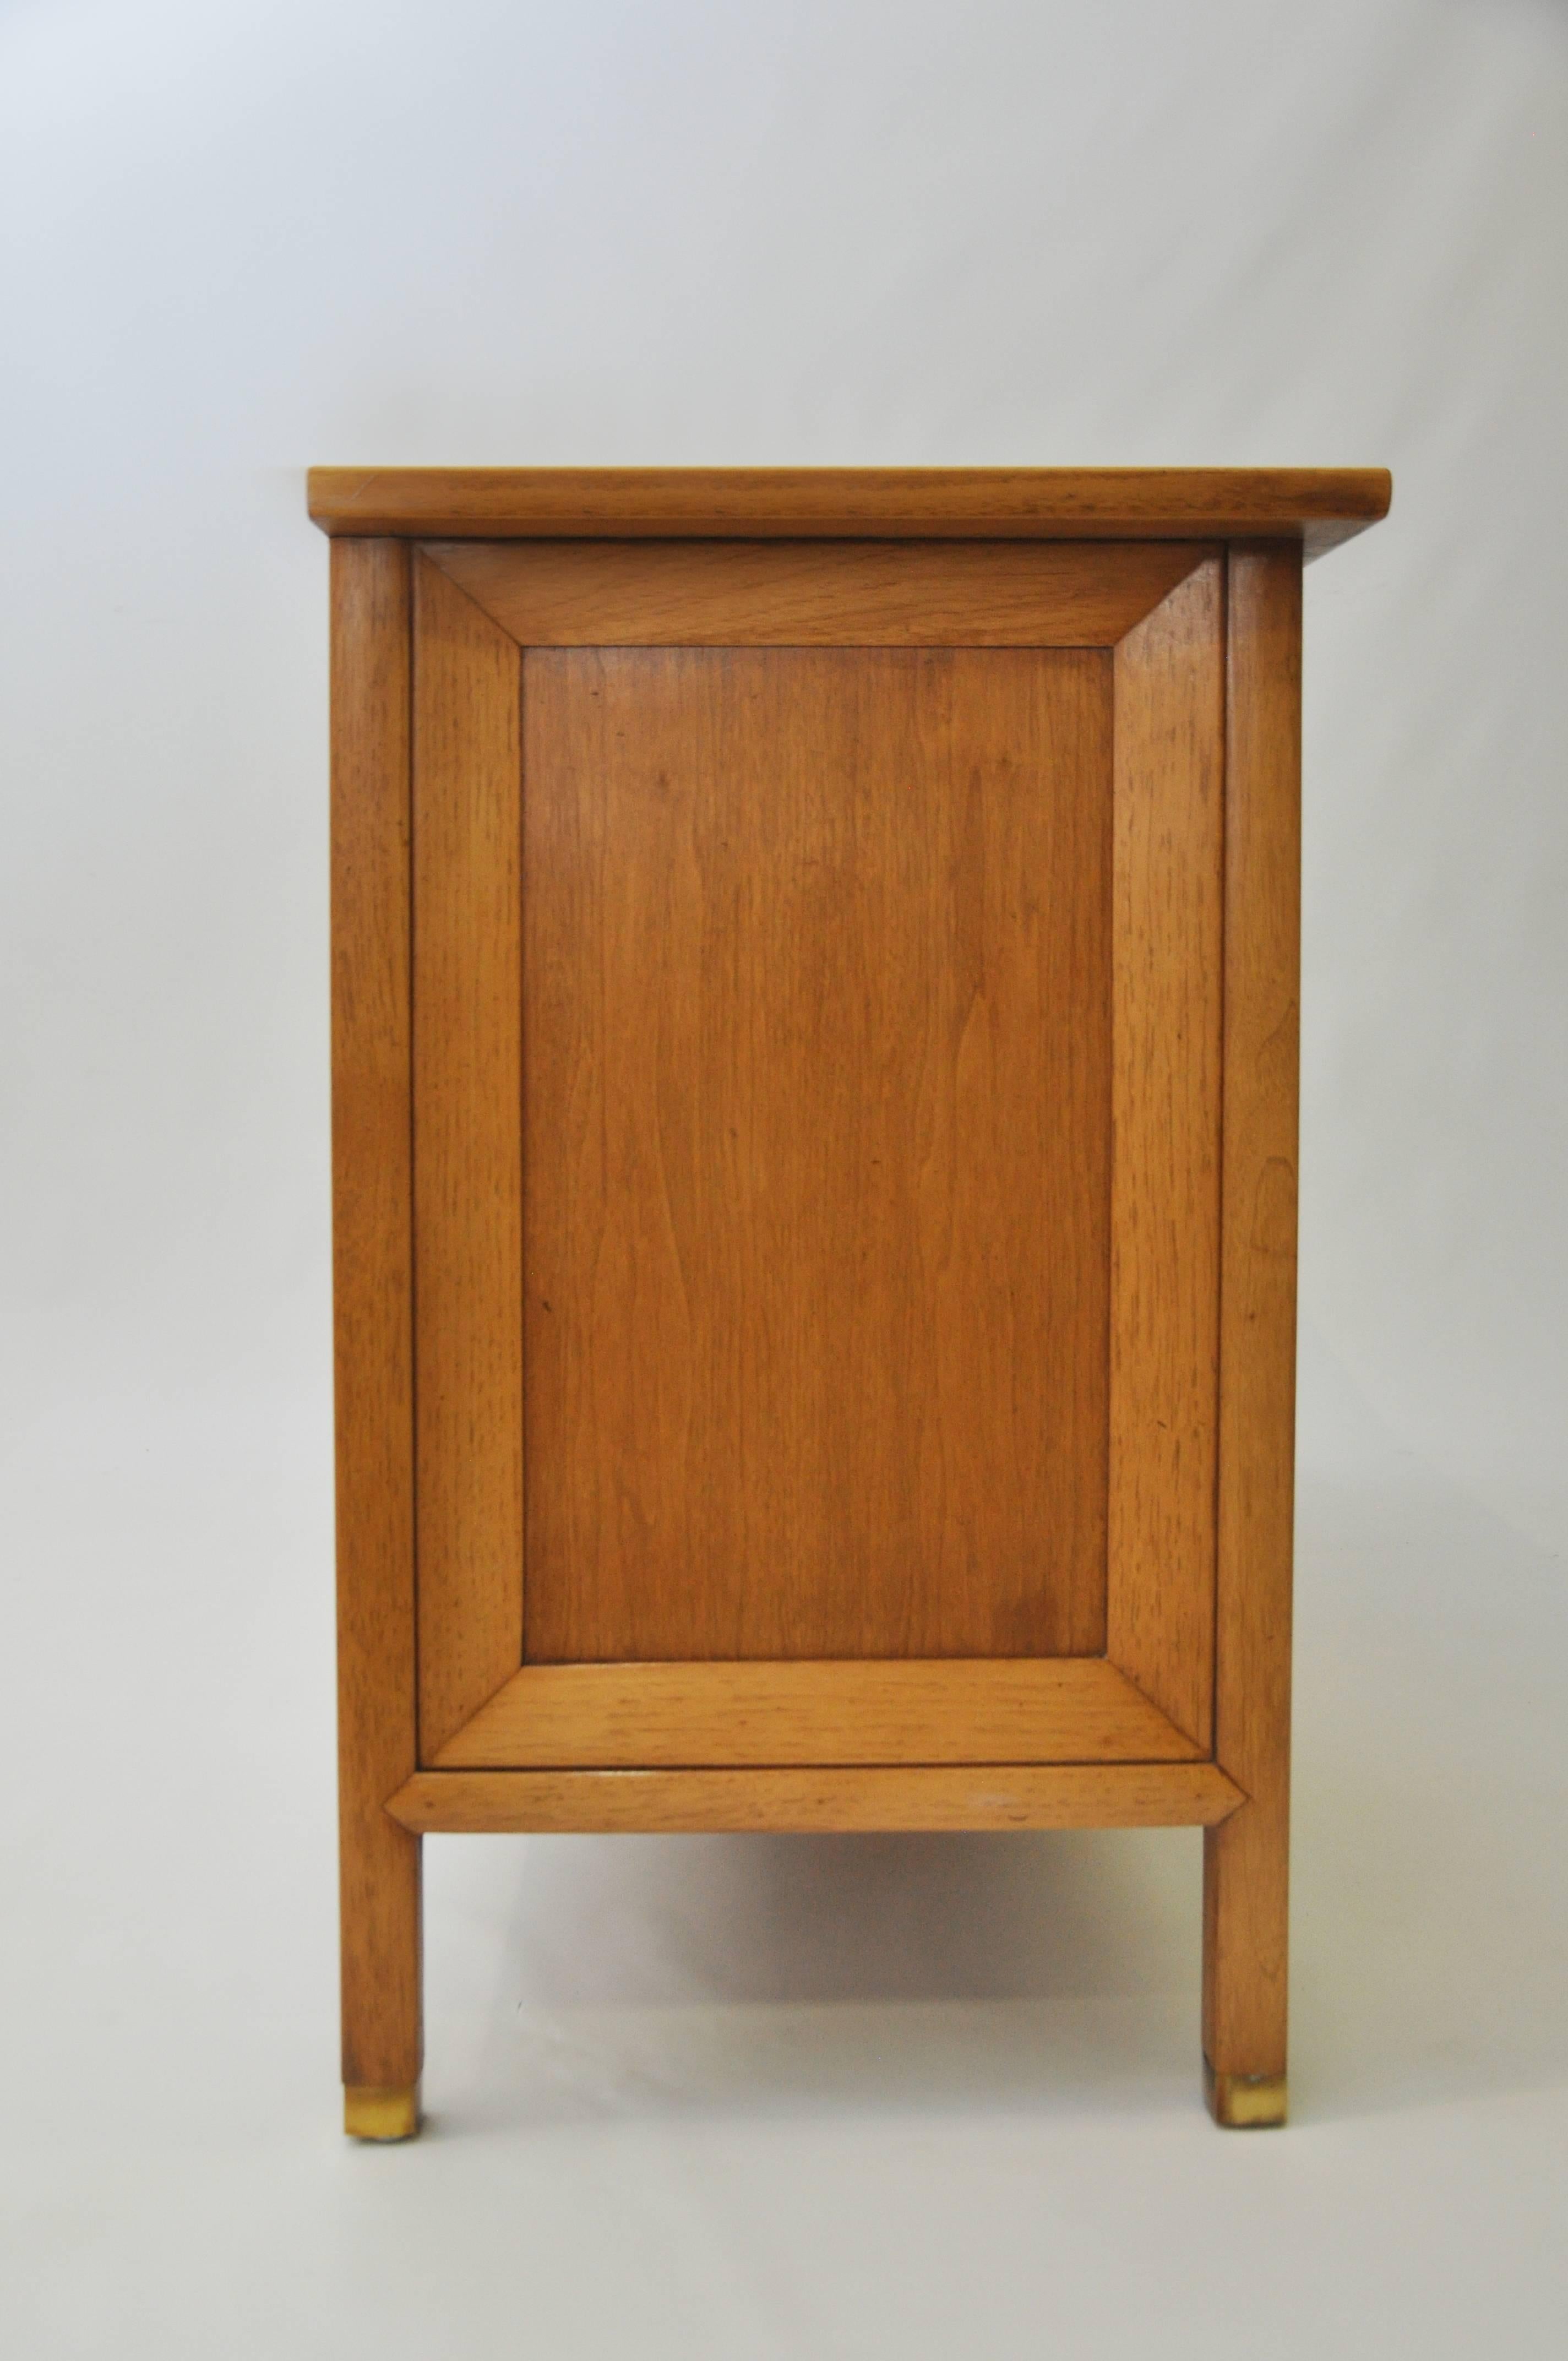 Part of Tomlinson's Sophisticate line, developed in the mid-1950s and continued throughout the 1960s. Beautiful pecan and butternut case, with inset burl Myrtlewood veneer doors. The three-panel doors fold back to reveal storage for glassware and